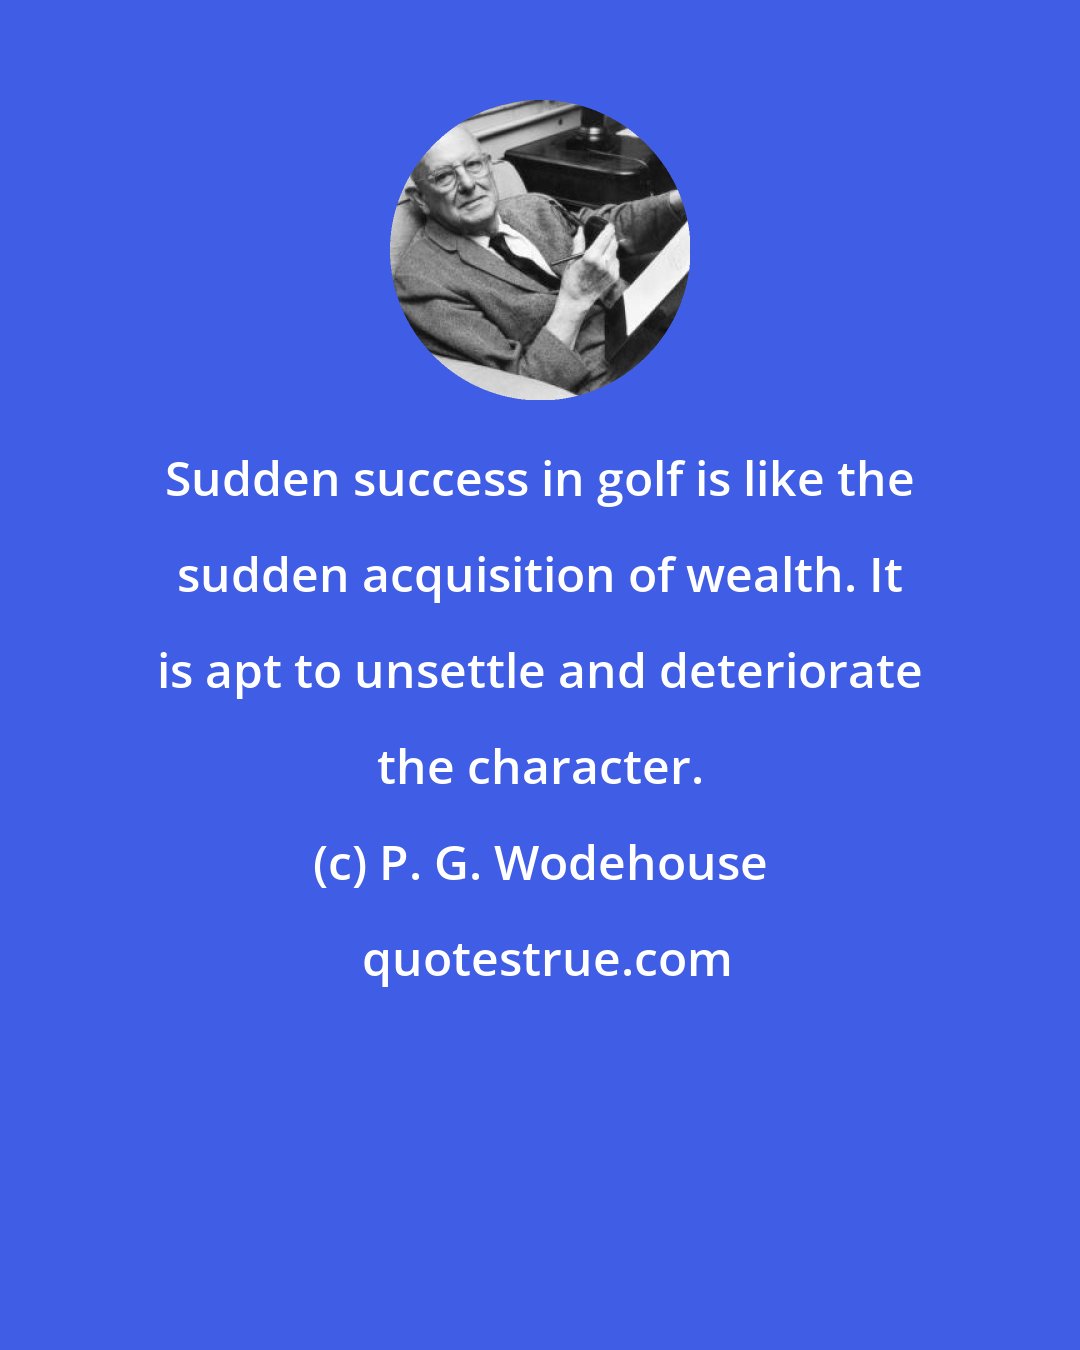 P. G. Wodehouse: Sudden success in golf is like the sudden acquisition of wealth. It is apt to unsettle and deteriorate the character.